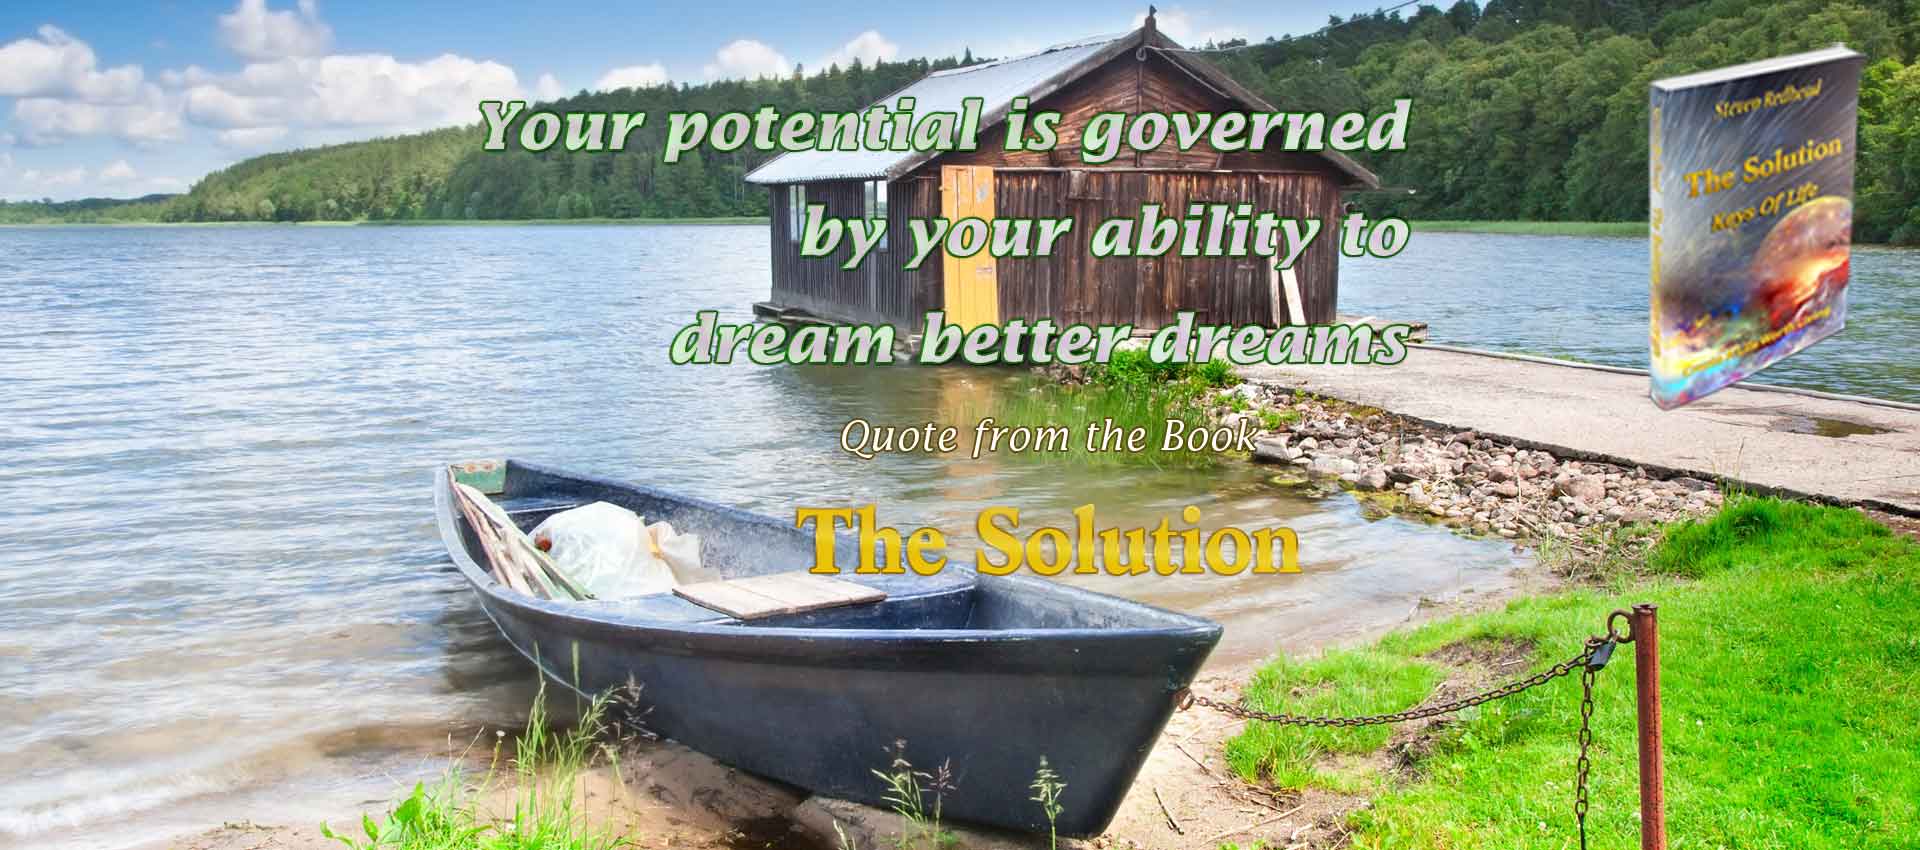 The Solution Book Excert